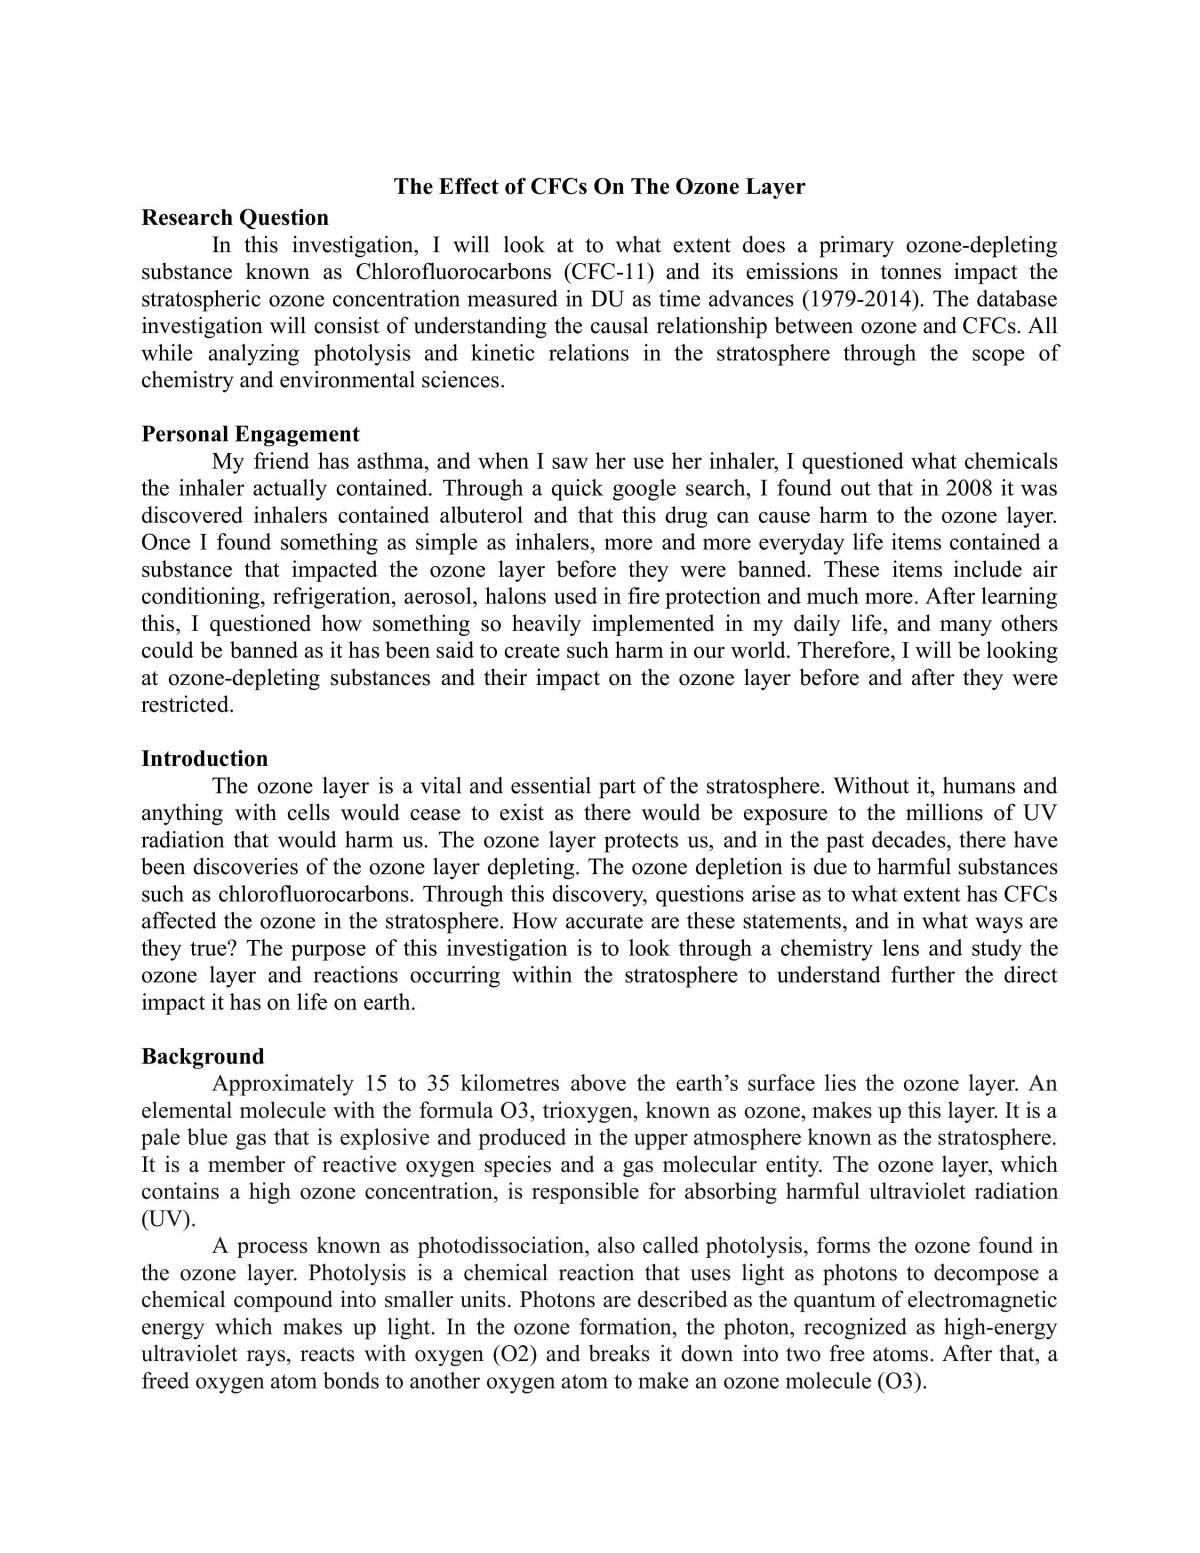 The Effect of CFCs On The Ozone Layer - Page 1